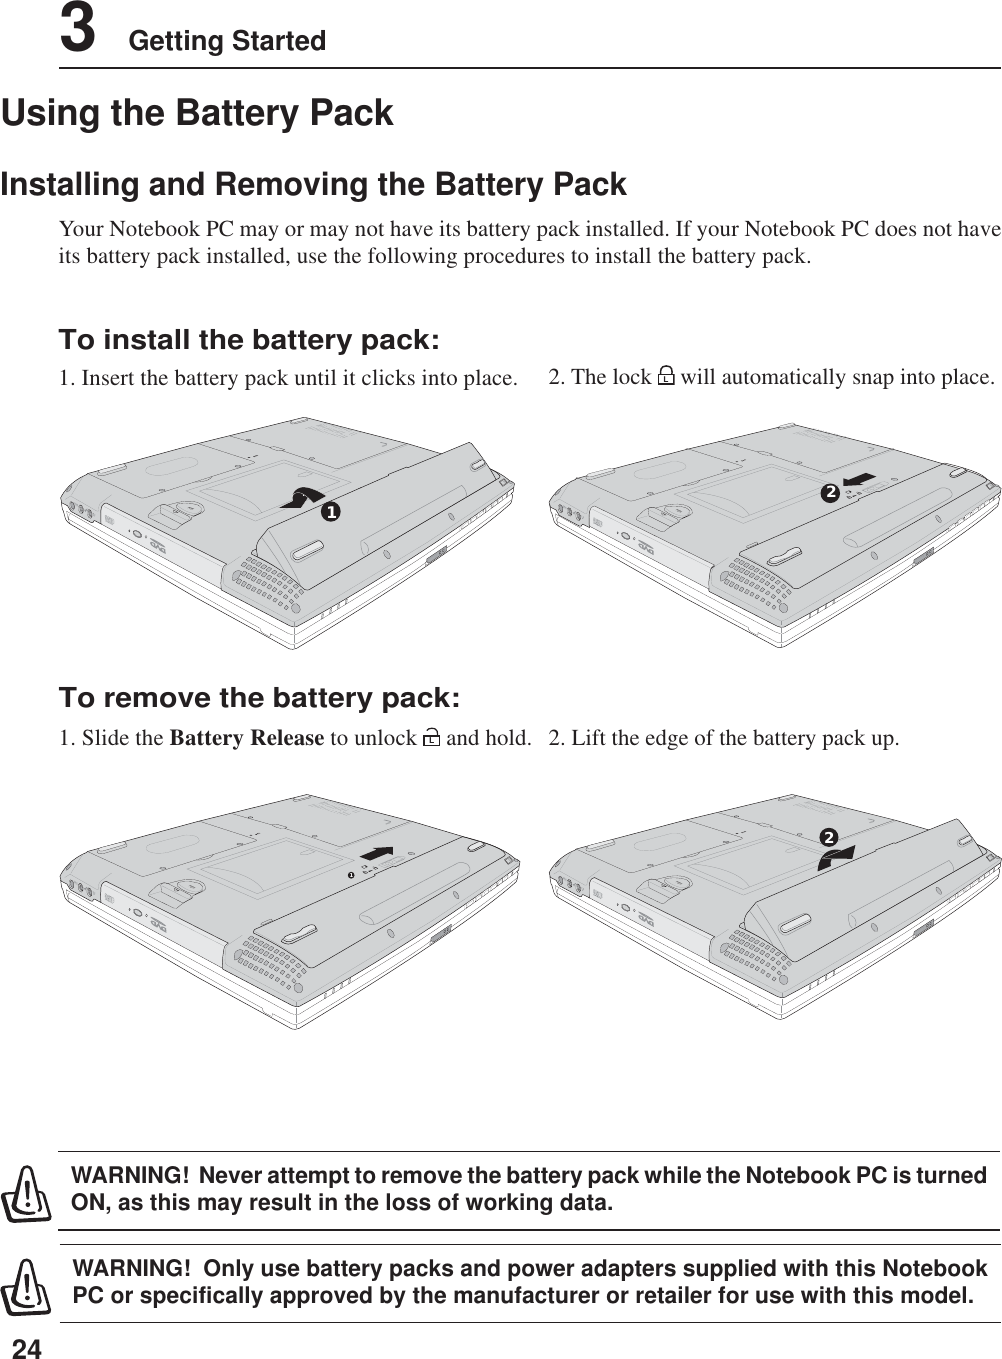 243    Getting StartedDCINLLPUSH11DCINLLPUSH1Using the Battery PackInstalling and Removing the Battery PackYour Notebook PC may or may not have its battery pack installed. If your Notebook PC does not haveits battery pack installed, use the following procedures to install the battery pack.WARNING!  Only use battery packs and power adapters supplied with this NotebookPC or specifically approved by the manufacturer or retailer for use with this model.WARNING!  Never attempt to remove the battery pack while the Notebook PC is turnedON, as this may result in the loss of working data.To install the battery pack:1. Insert the battery pack until it clicks into place.To remove the battery pack:1. Slide the Battery Release to unlock L and hold. 2. Lift the edge of the battery pack up.2. The lock L will automatically snap into place.DCINLLPUSH12DCINLLPUSH2